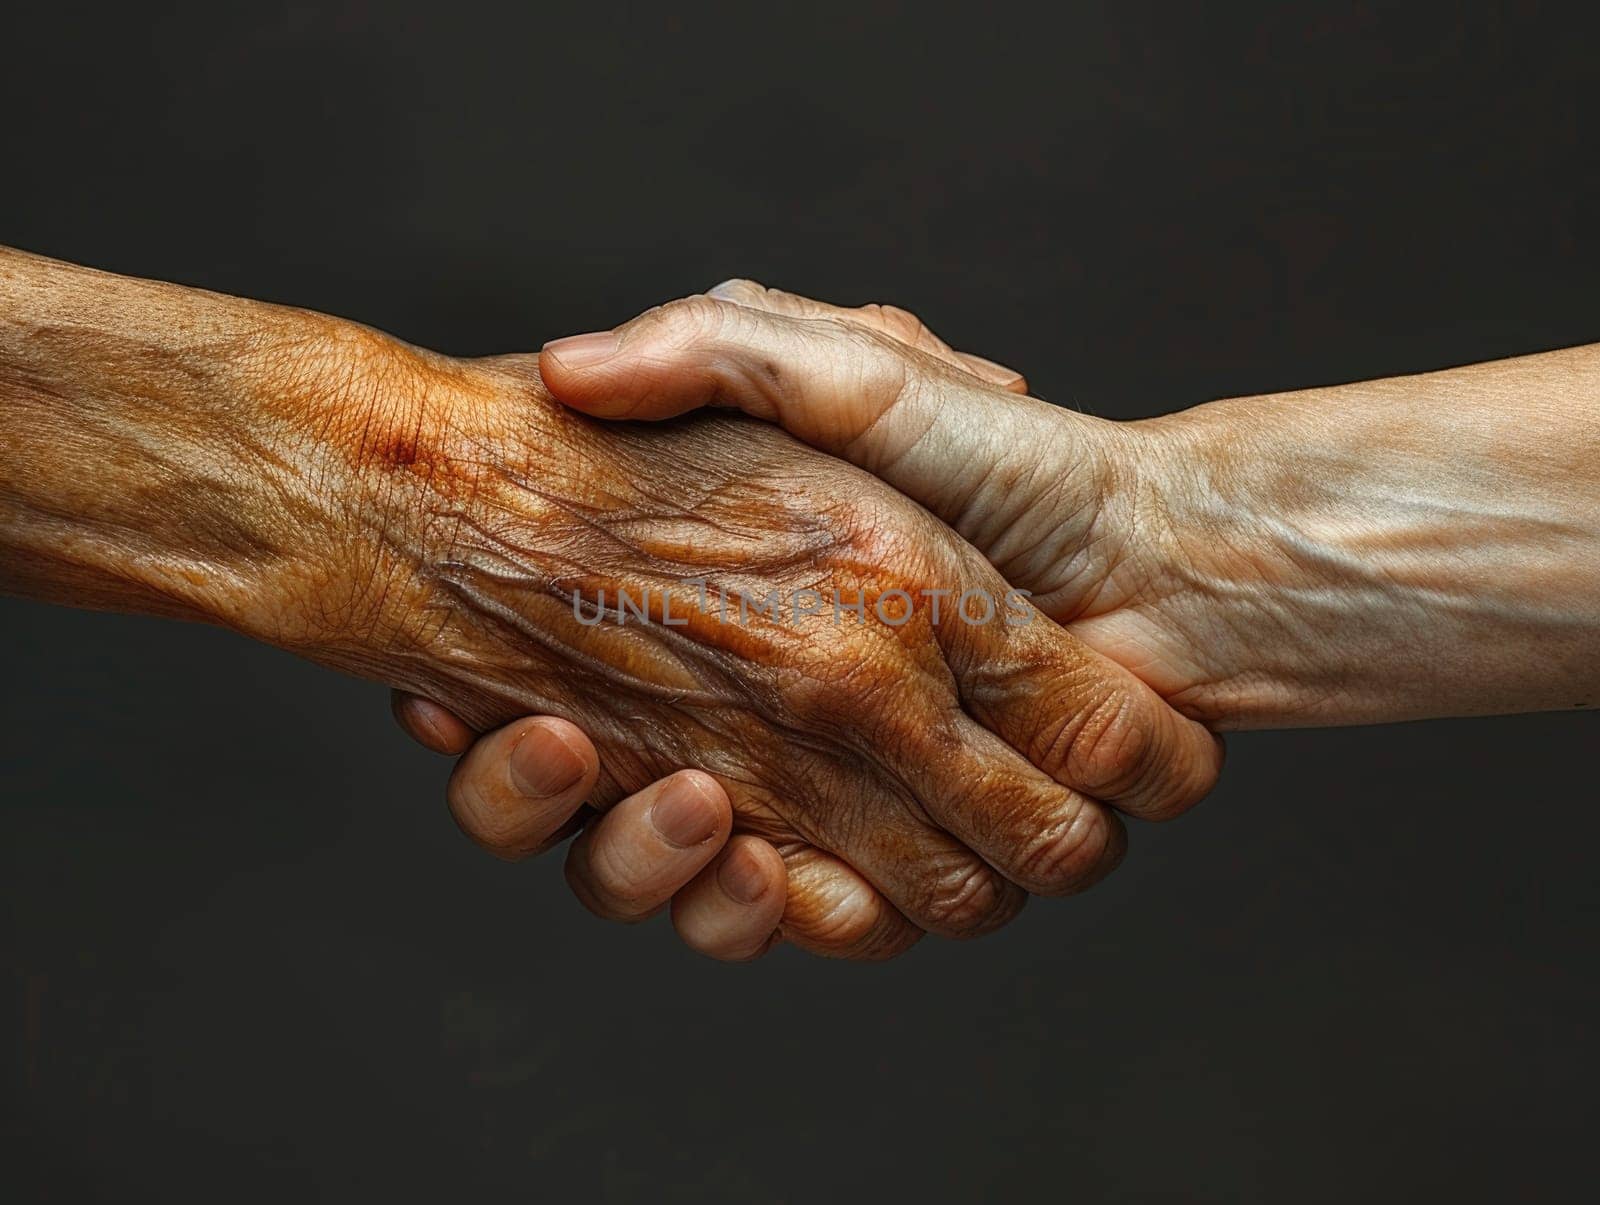 Close-Up of Diverse Handshake on Dark Background by but_photo